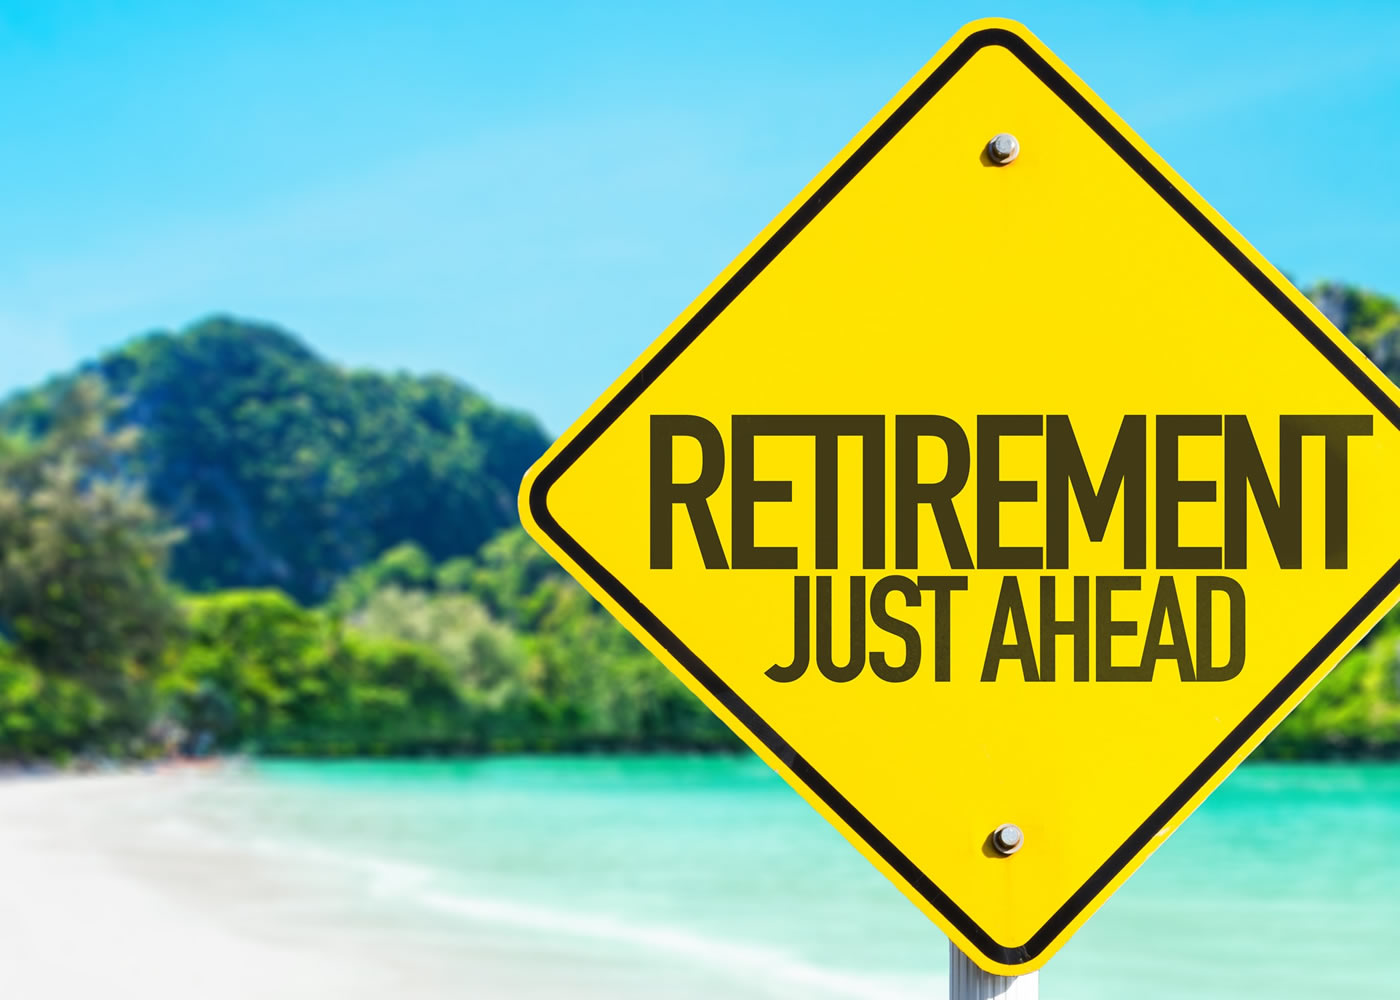 naem-2018-article-retirement-just-ahead-sign-beach-background-700x500